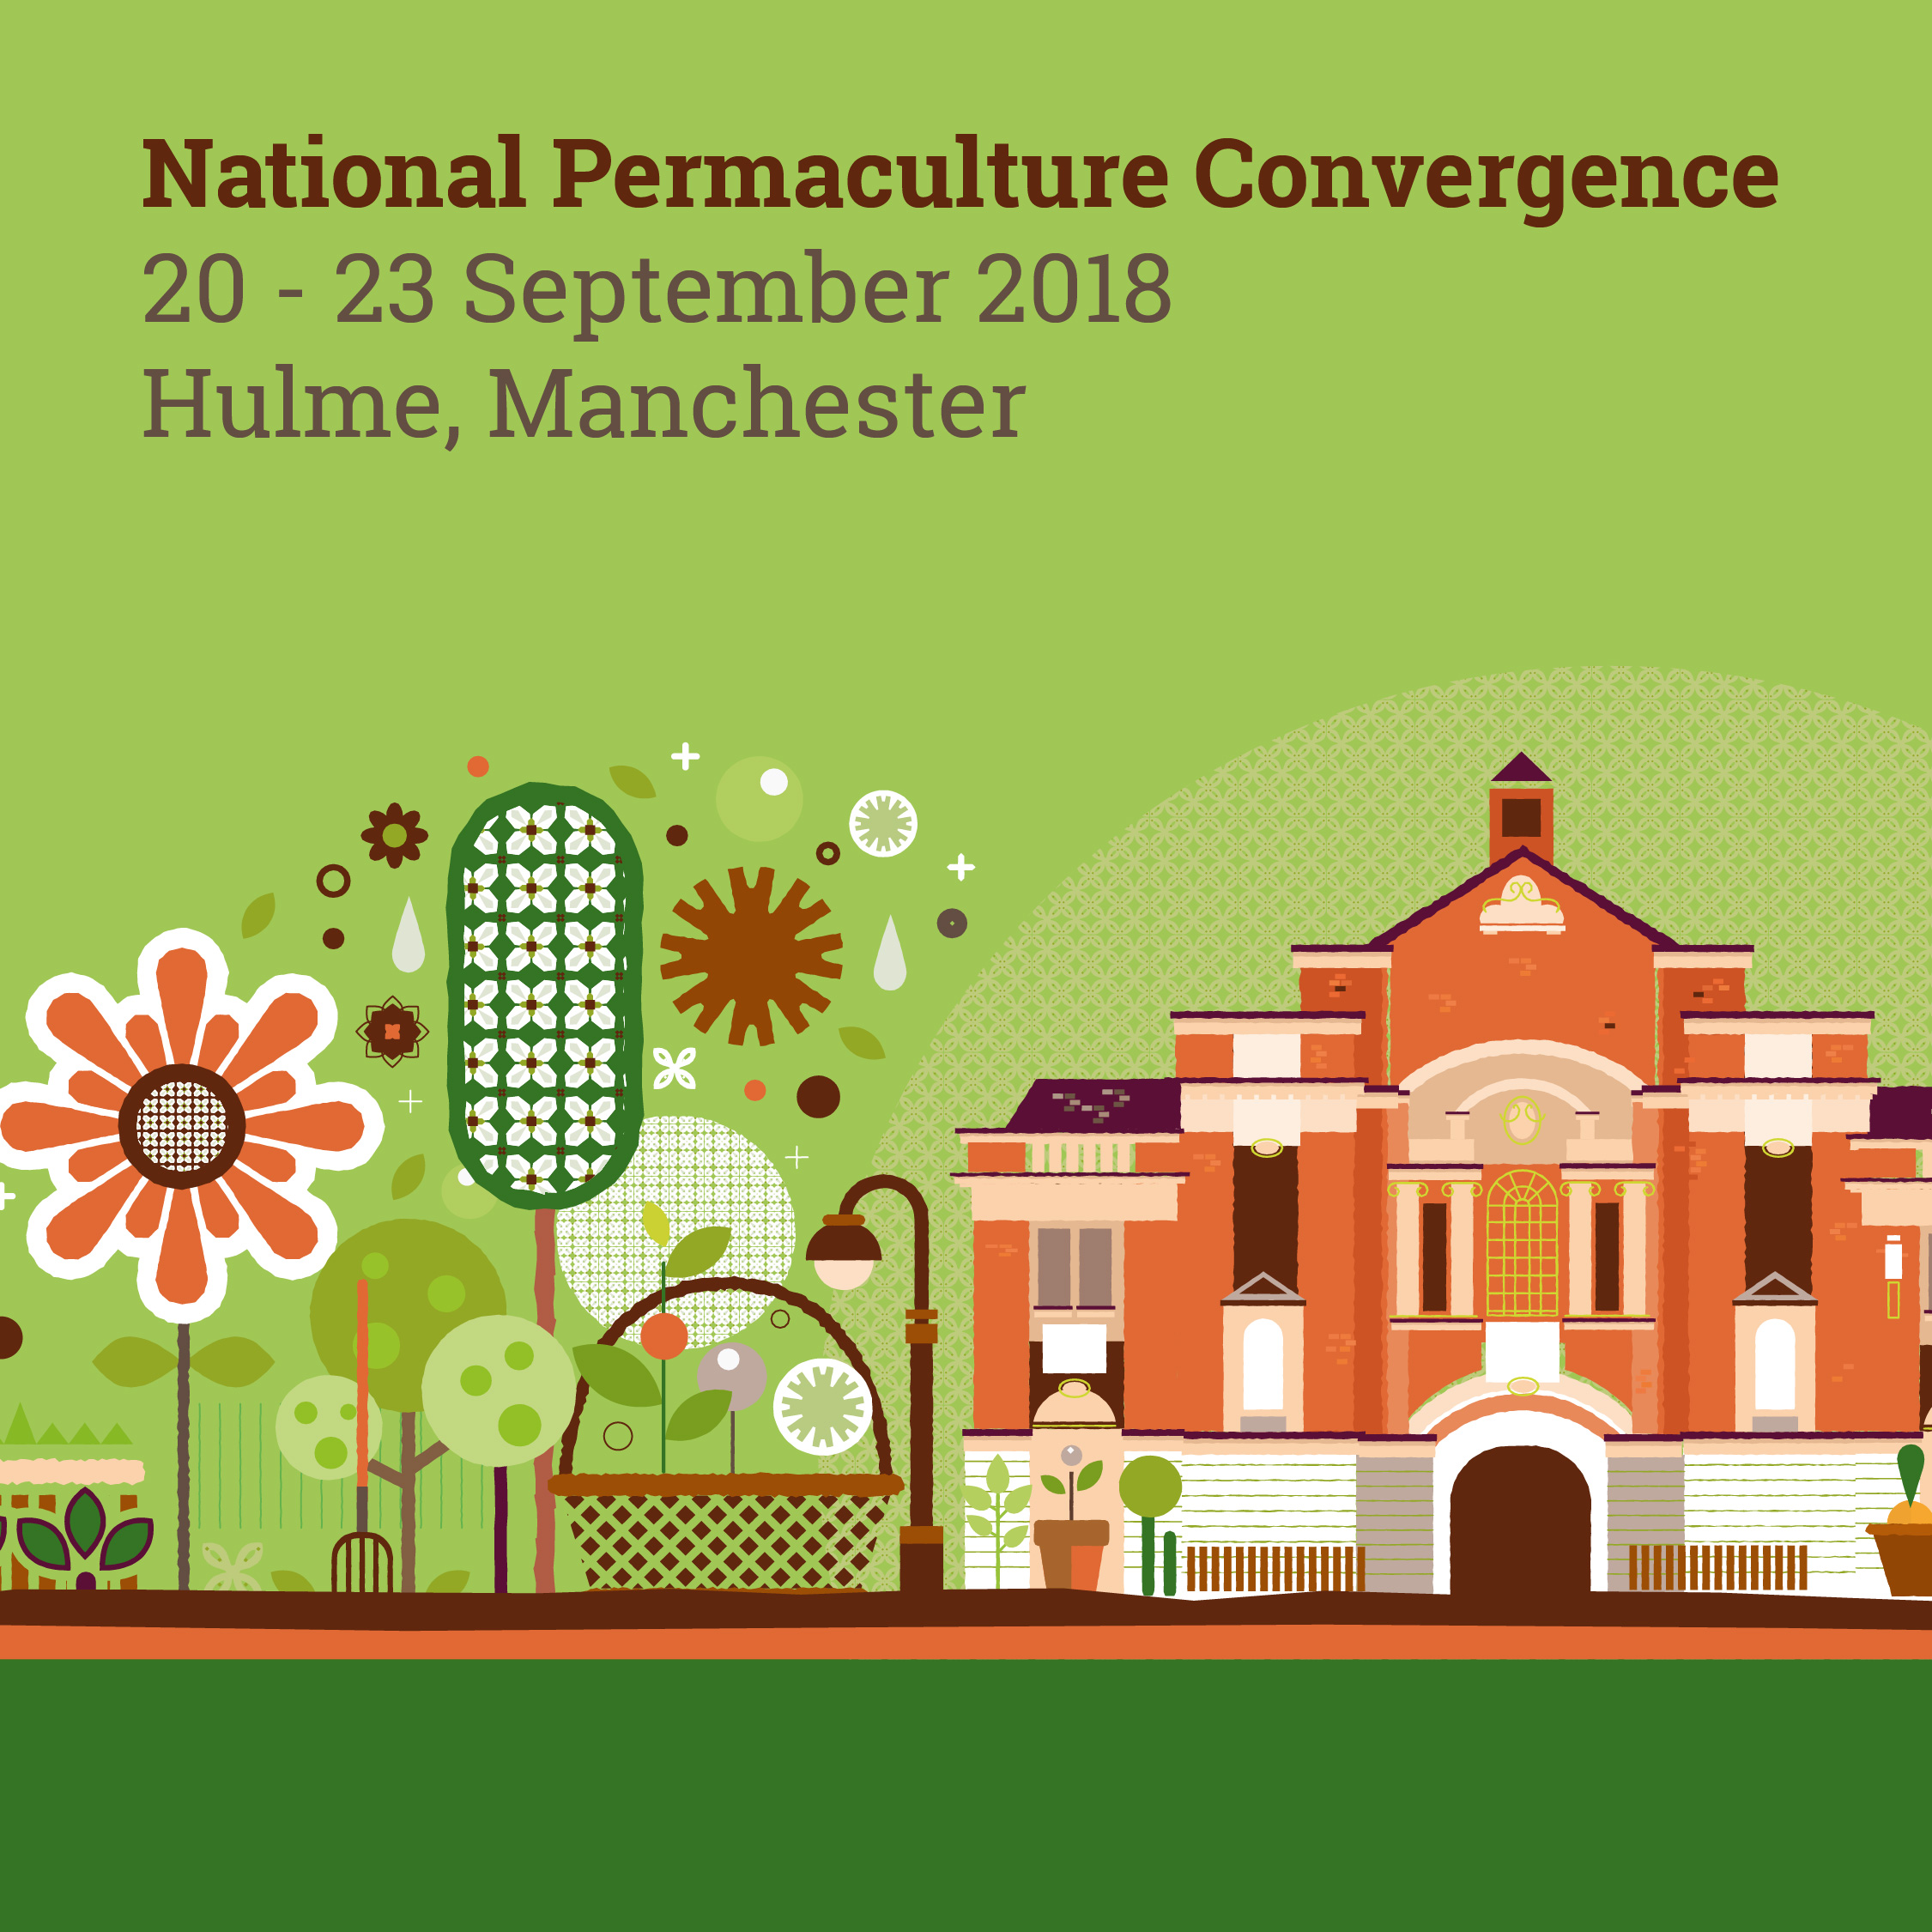 National Permaculture Convergence 20 - 23 September 2018 Hulme, Manchester